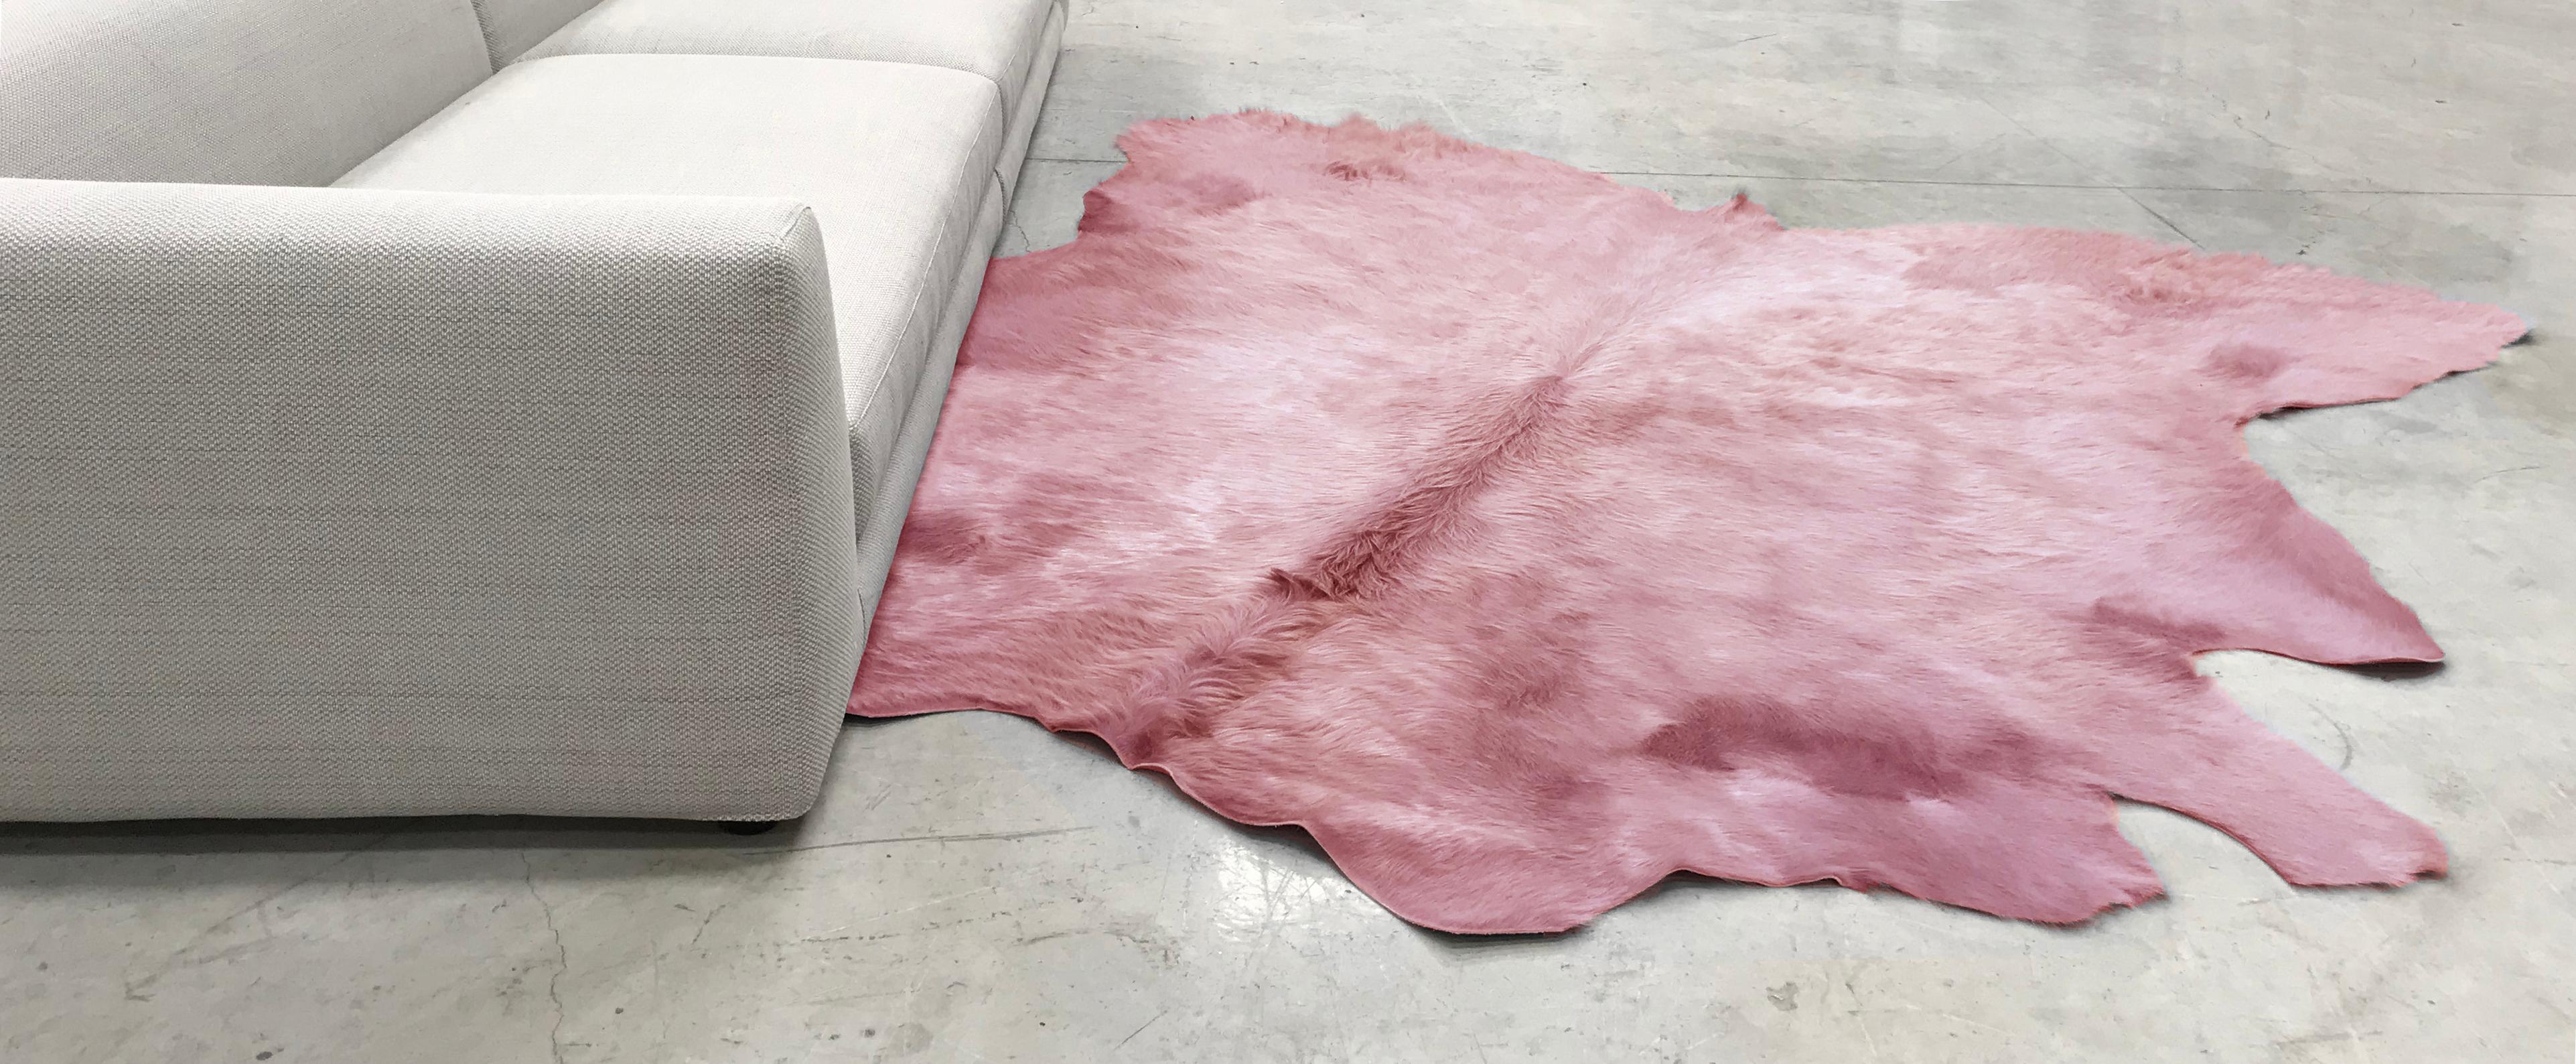 Cowhide rugs in Khaki, sustainably sourced and hand-dyed. 
Approximate dimensions: 230-260 x 230-260cm 
Six different colors: Salmon Pink, Burgundy, Khaki, Light Grey, Mid Grey and Black

Please note that color hues may vary from batch to batch